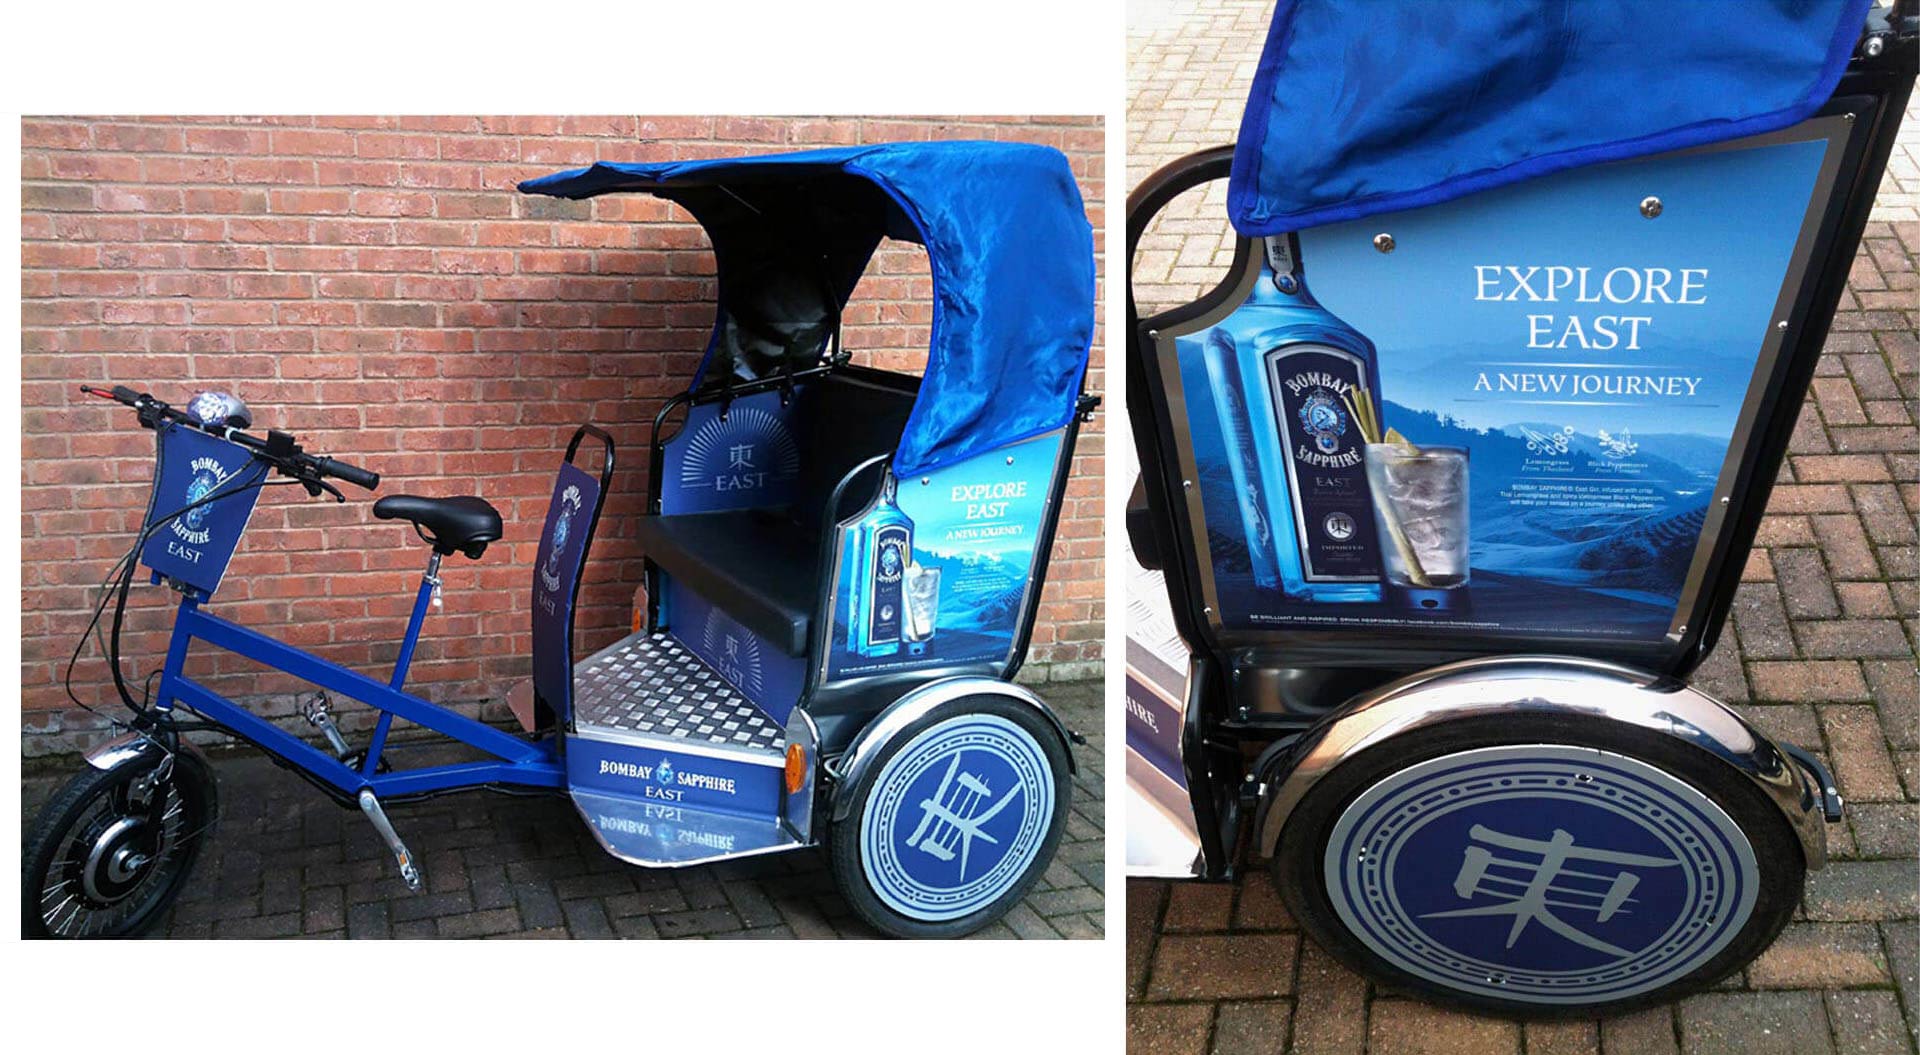 Bombay Sapphire East for World Duty Free Heathrow - Explore East a new journey the tuk tuk and branding design